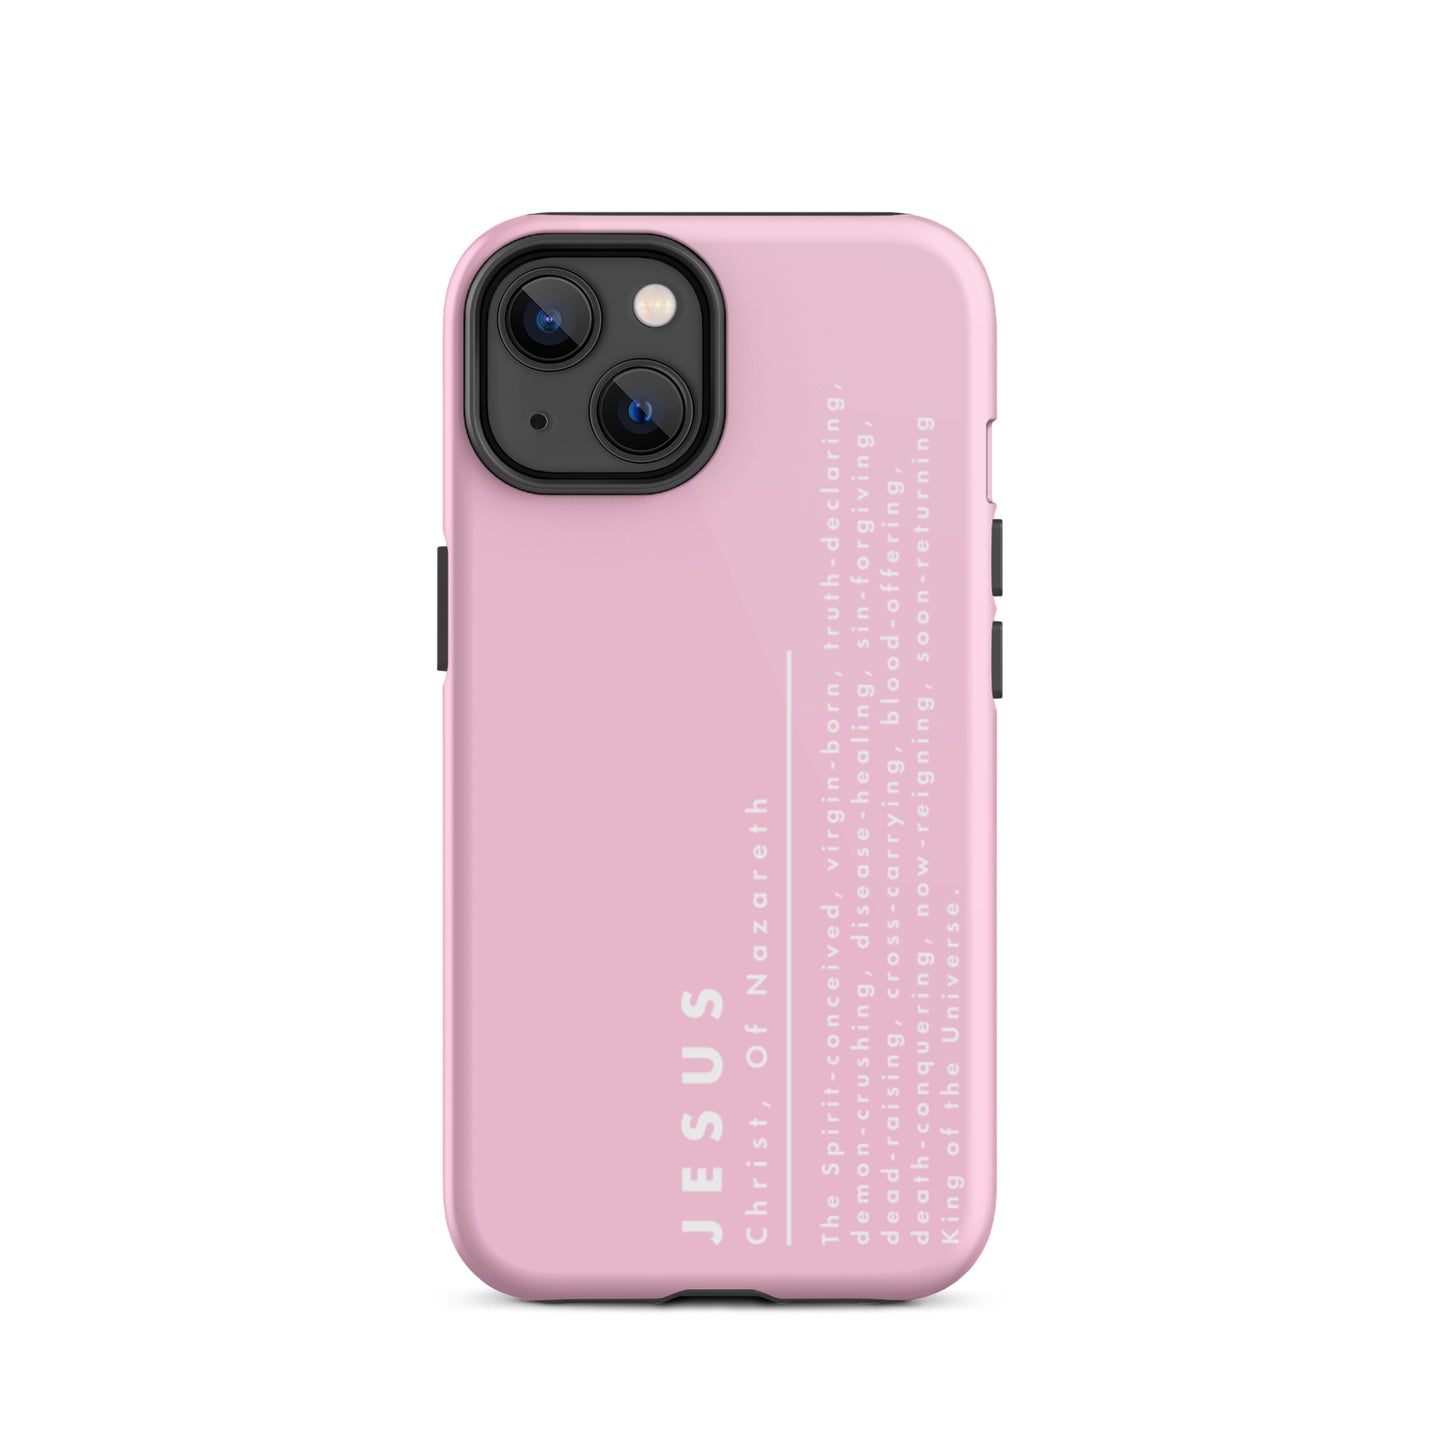 Jesus Christ, King Of The Universe | Tough iPhone Case | Pink